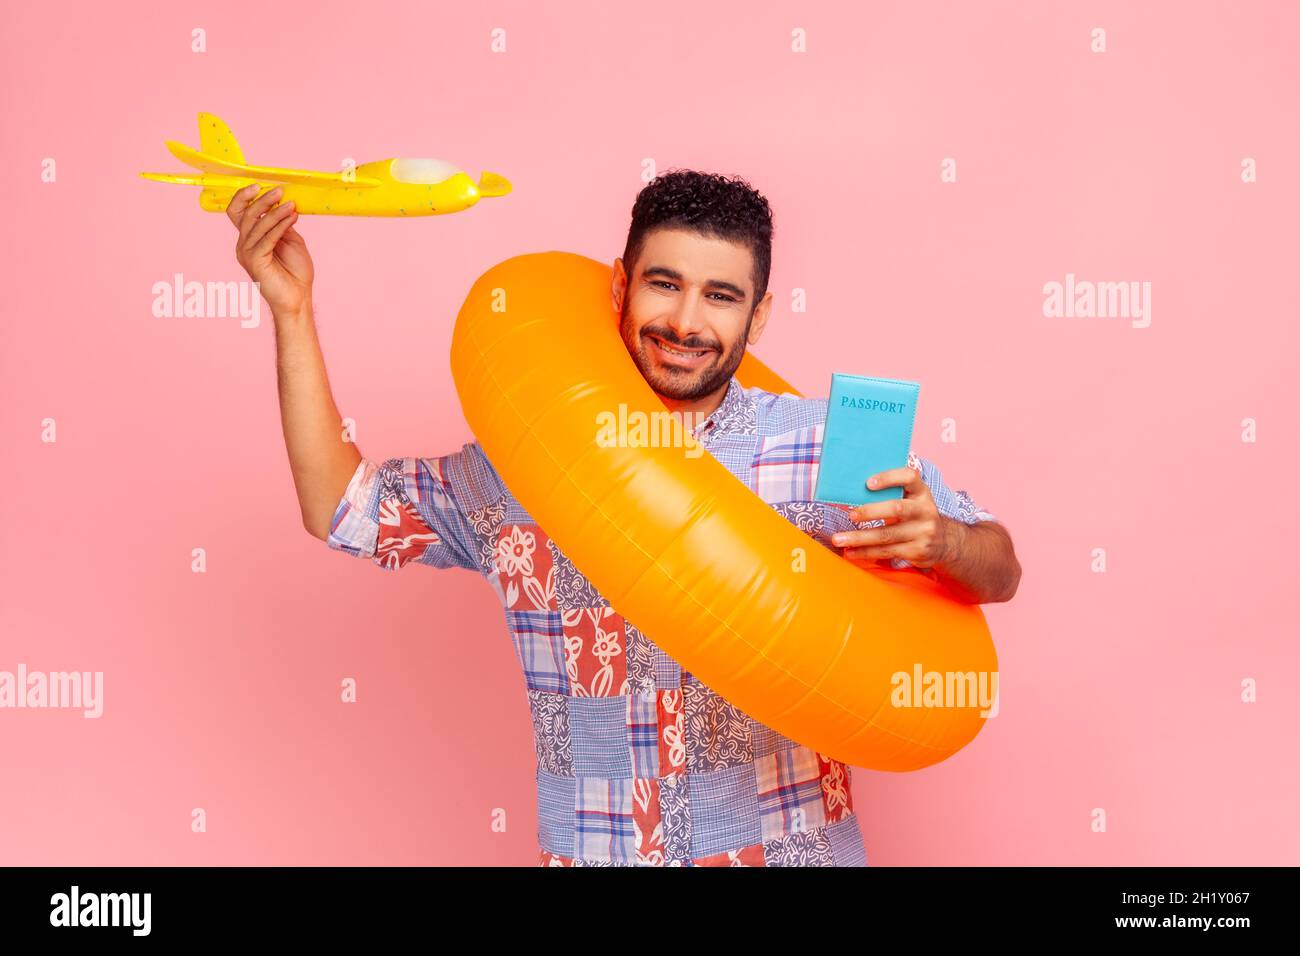 happy satisfied tourist man in blue shirt standing with rubber ring, holding passport document and airplane mockup, enjoying travel tour. Indoor studio shot isolated on pink background. Stock Photo